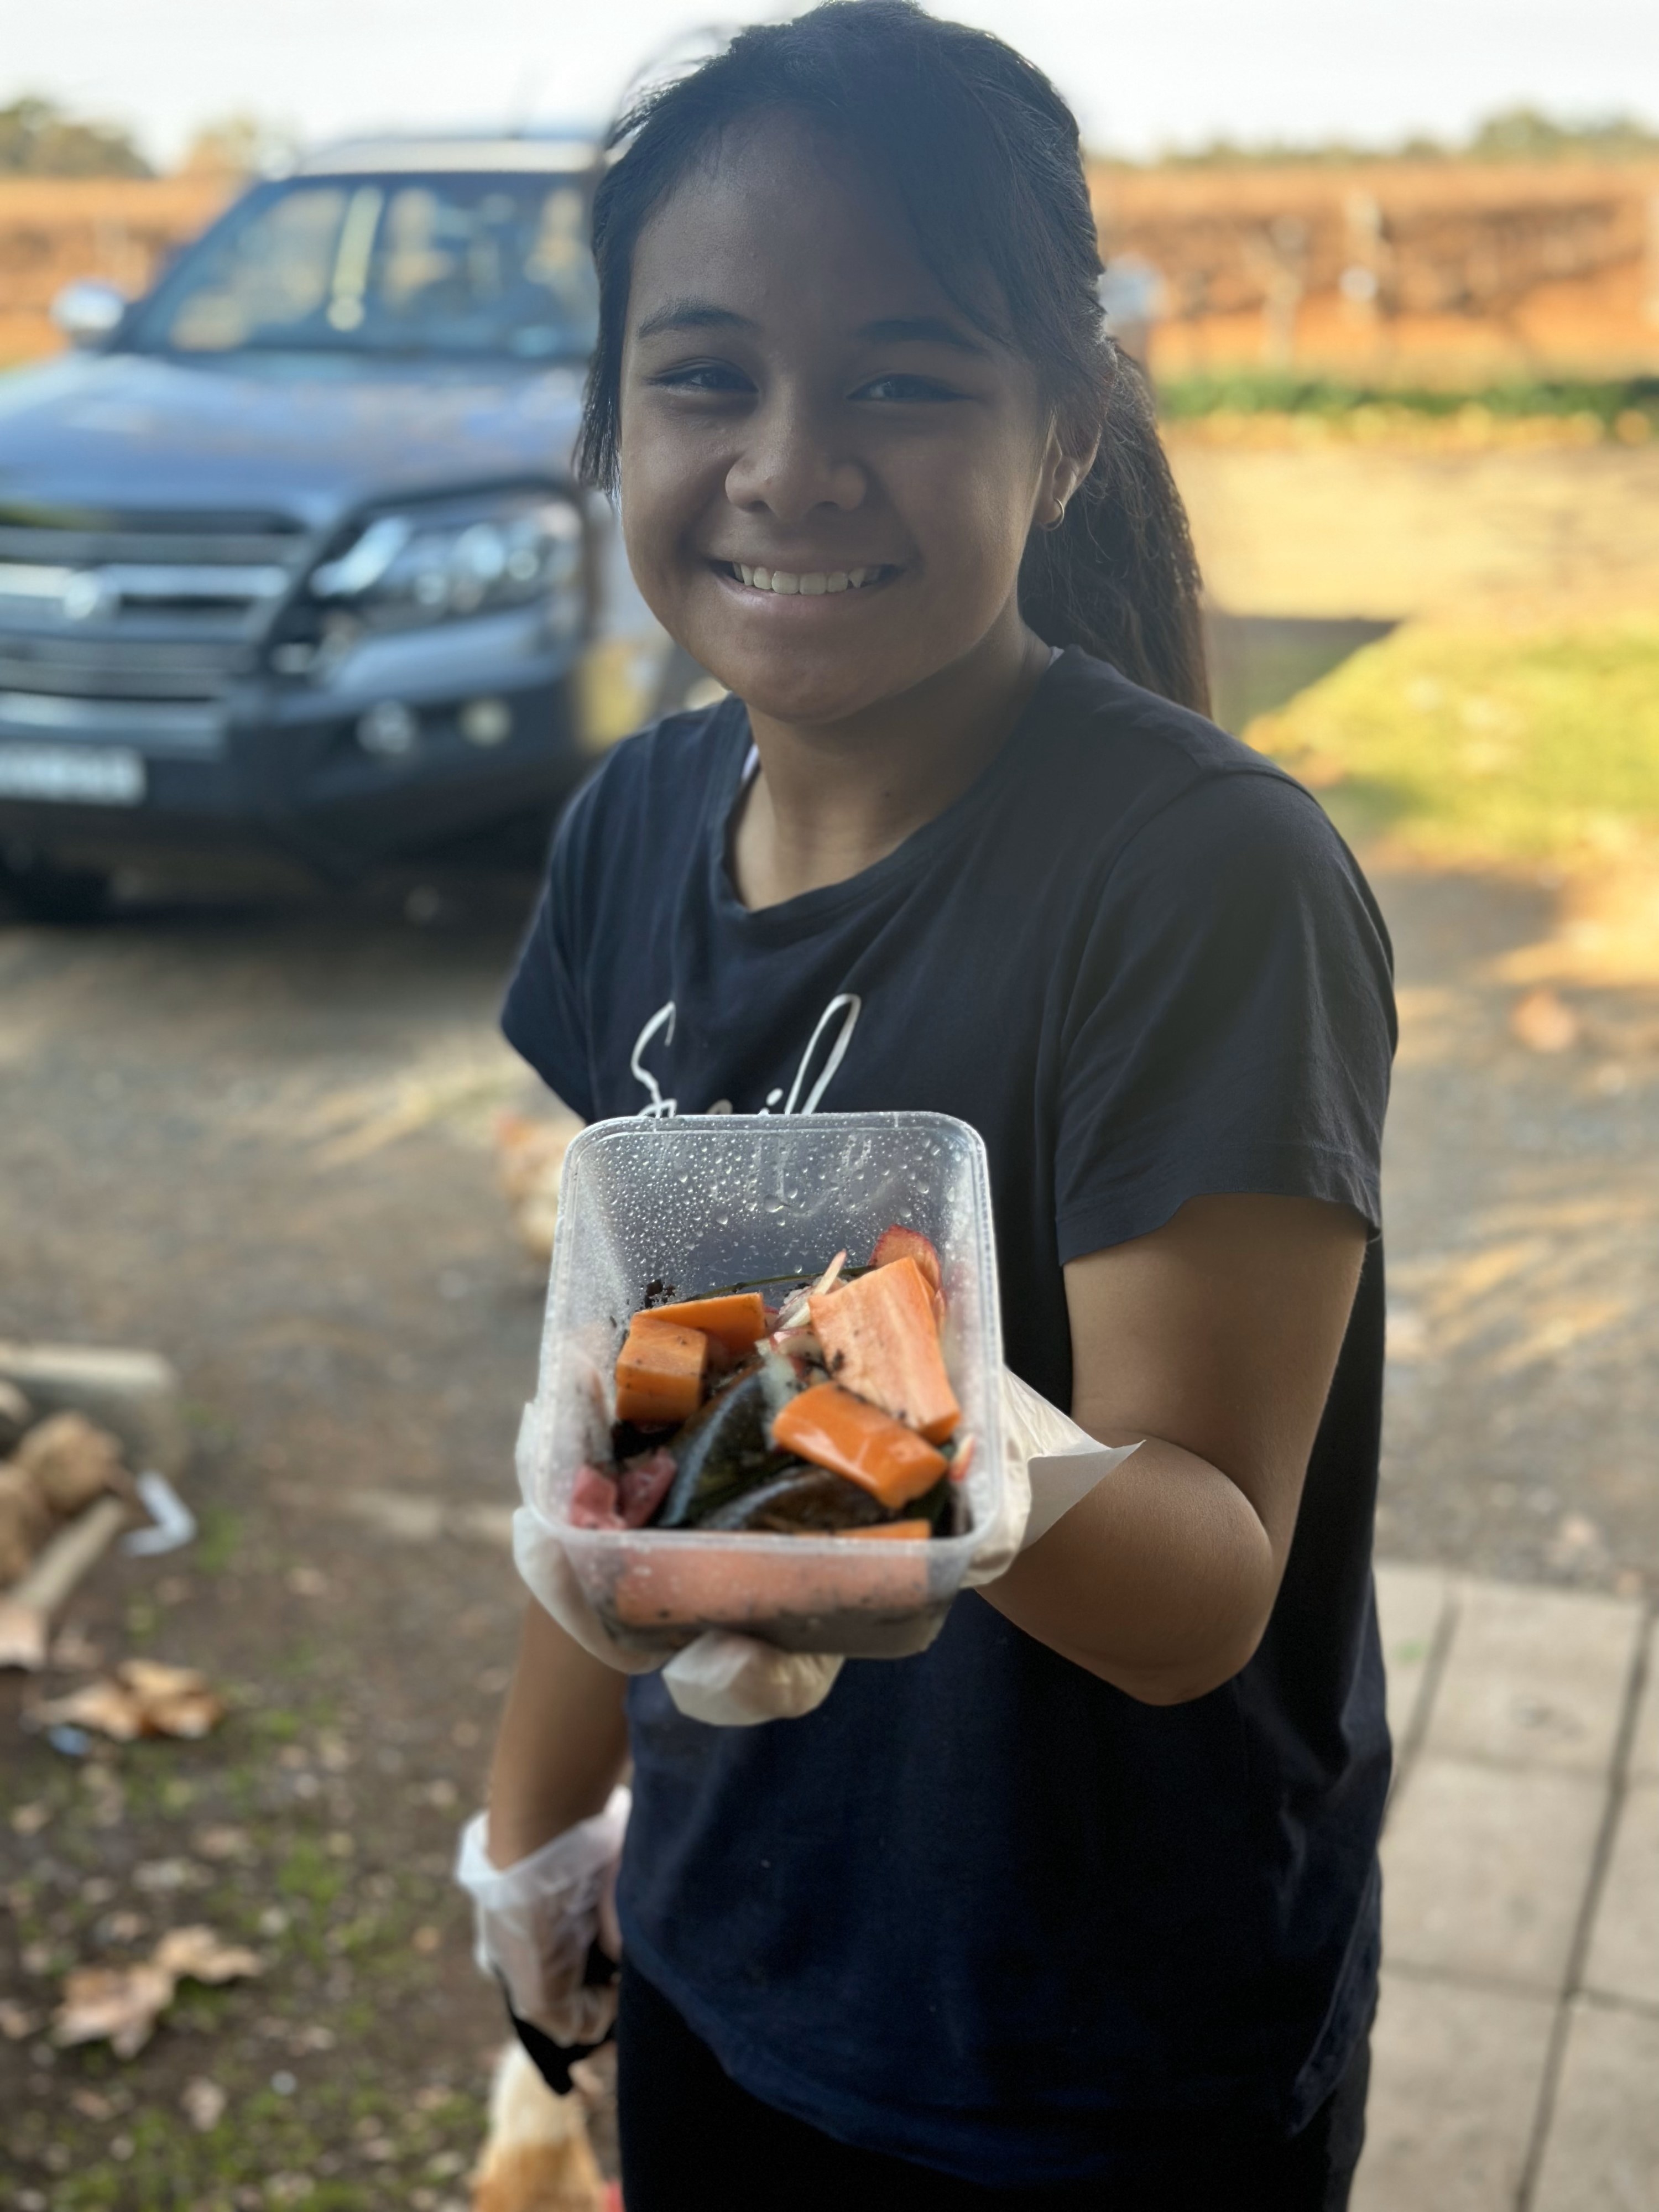 A young girl holding a cart of food scraps